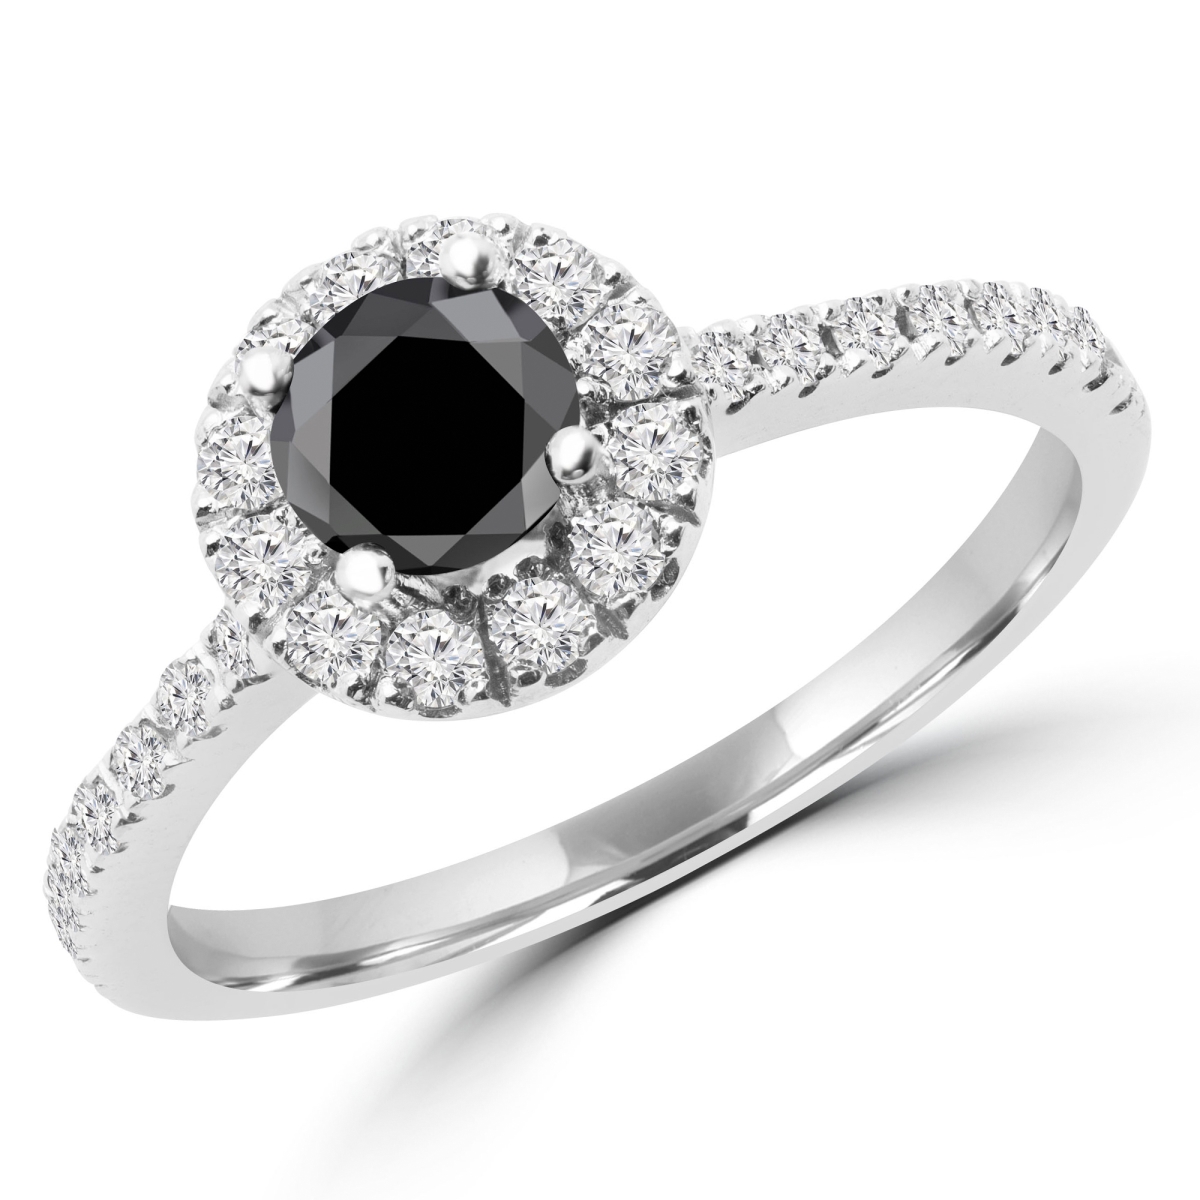 Picture of Majesty Diamonds MD170107 1 CTW Round BlacK Diamond Halo Engagement Ring in 14K